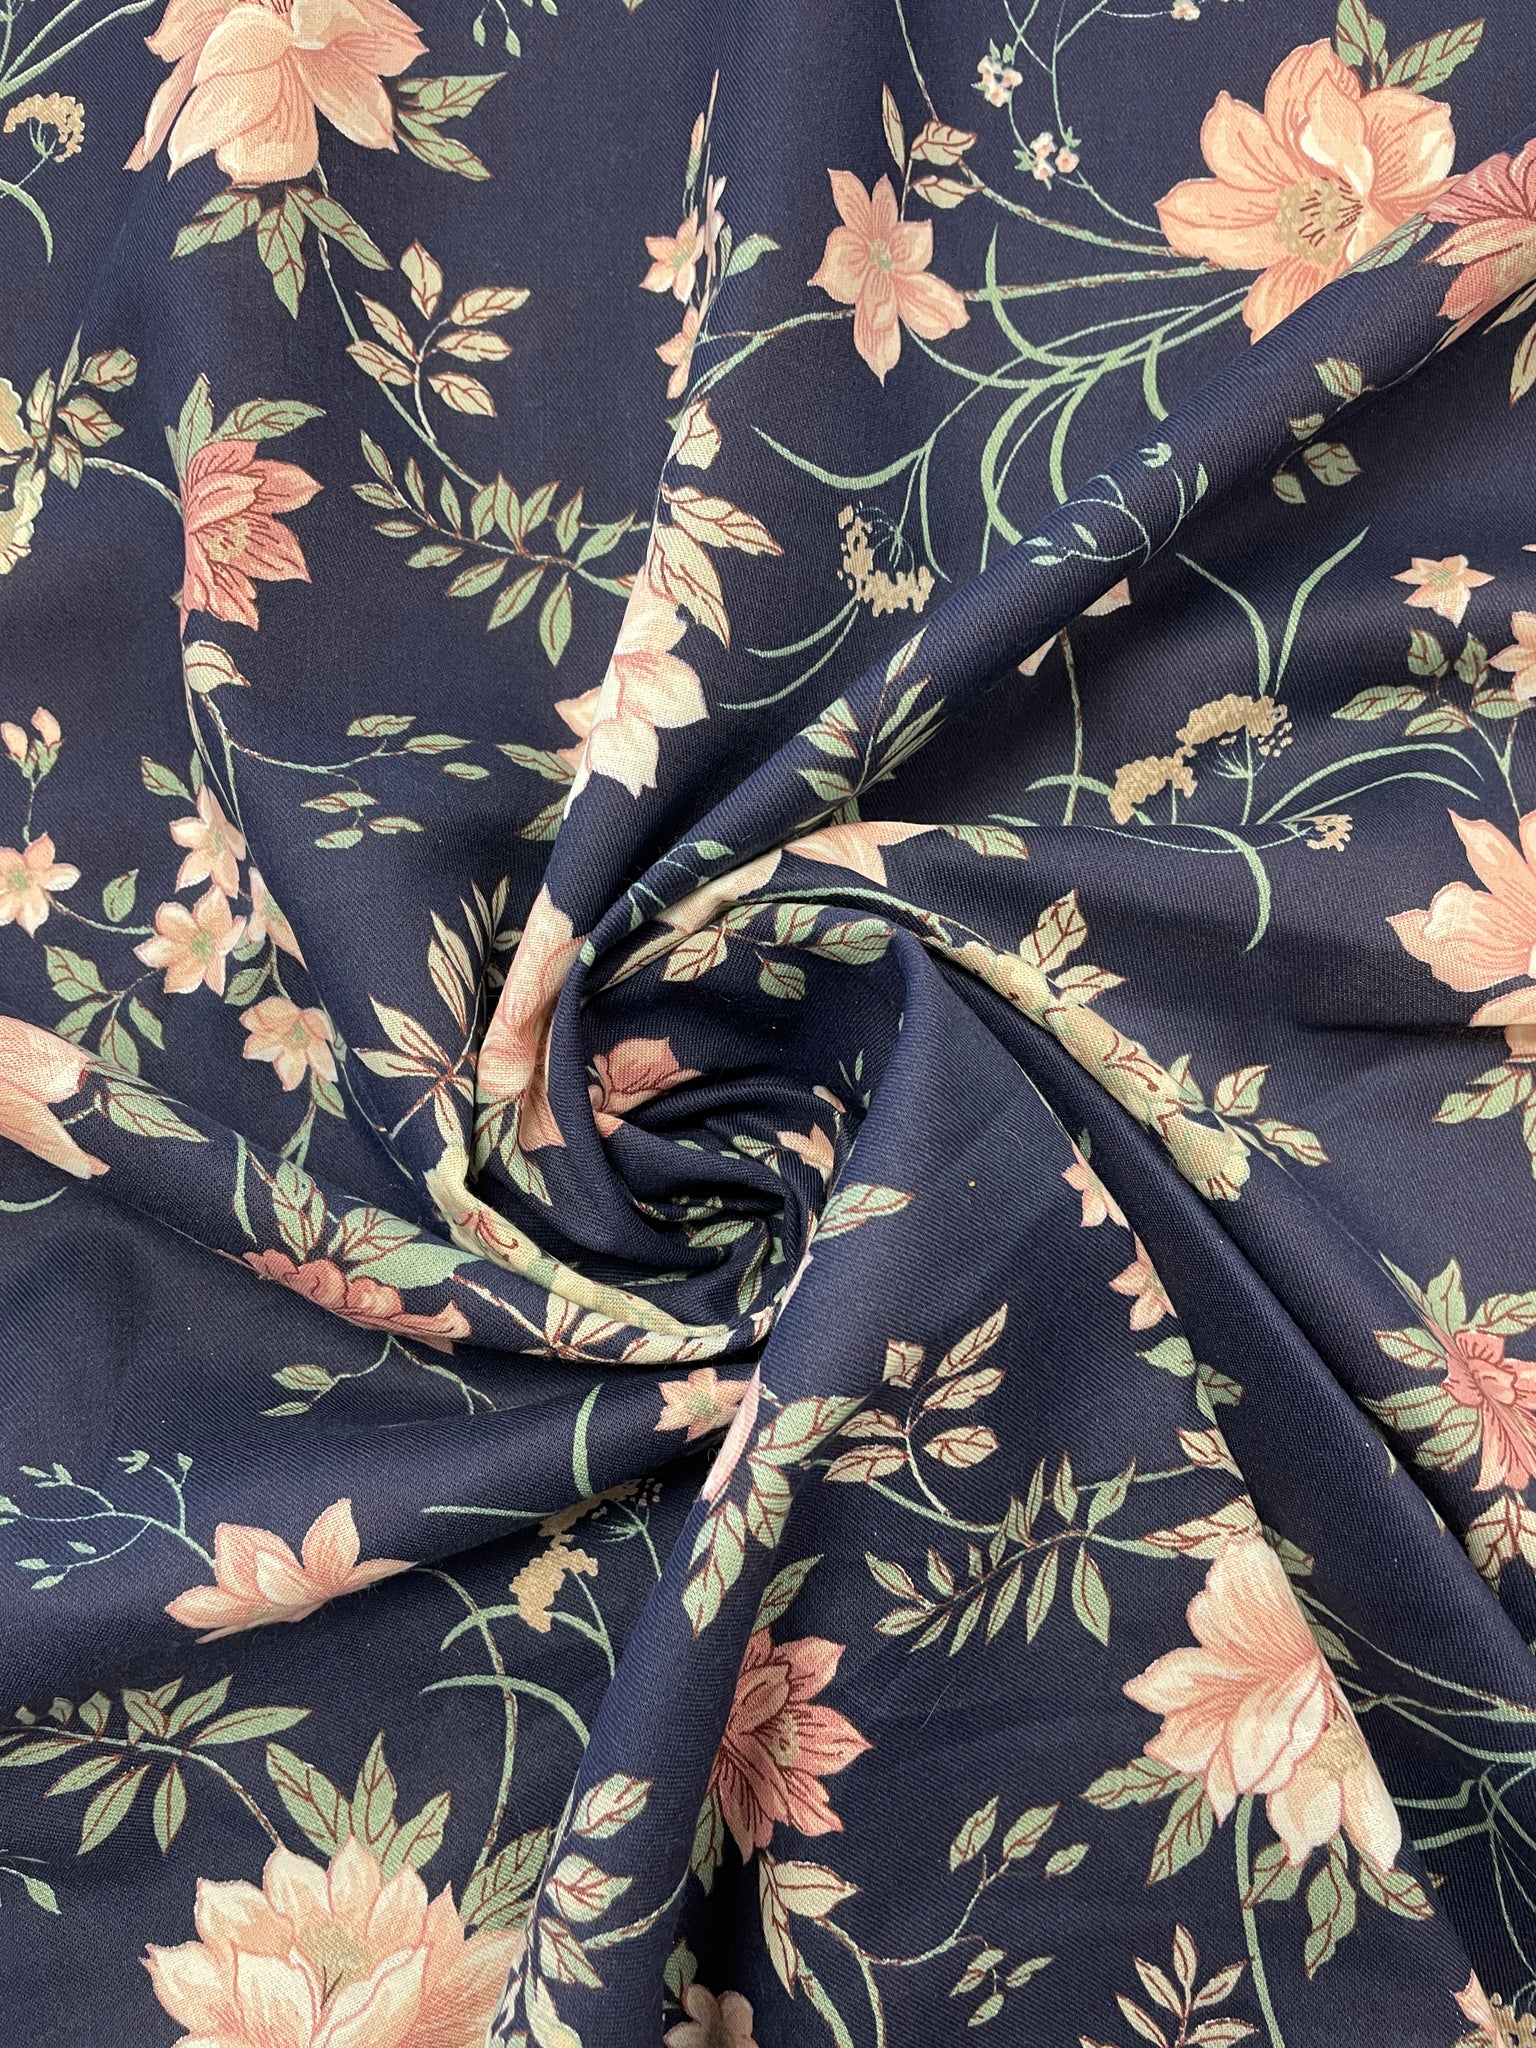 Cotton Blend - Navy Blue with Pink Flowers